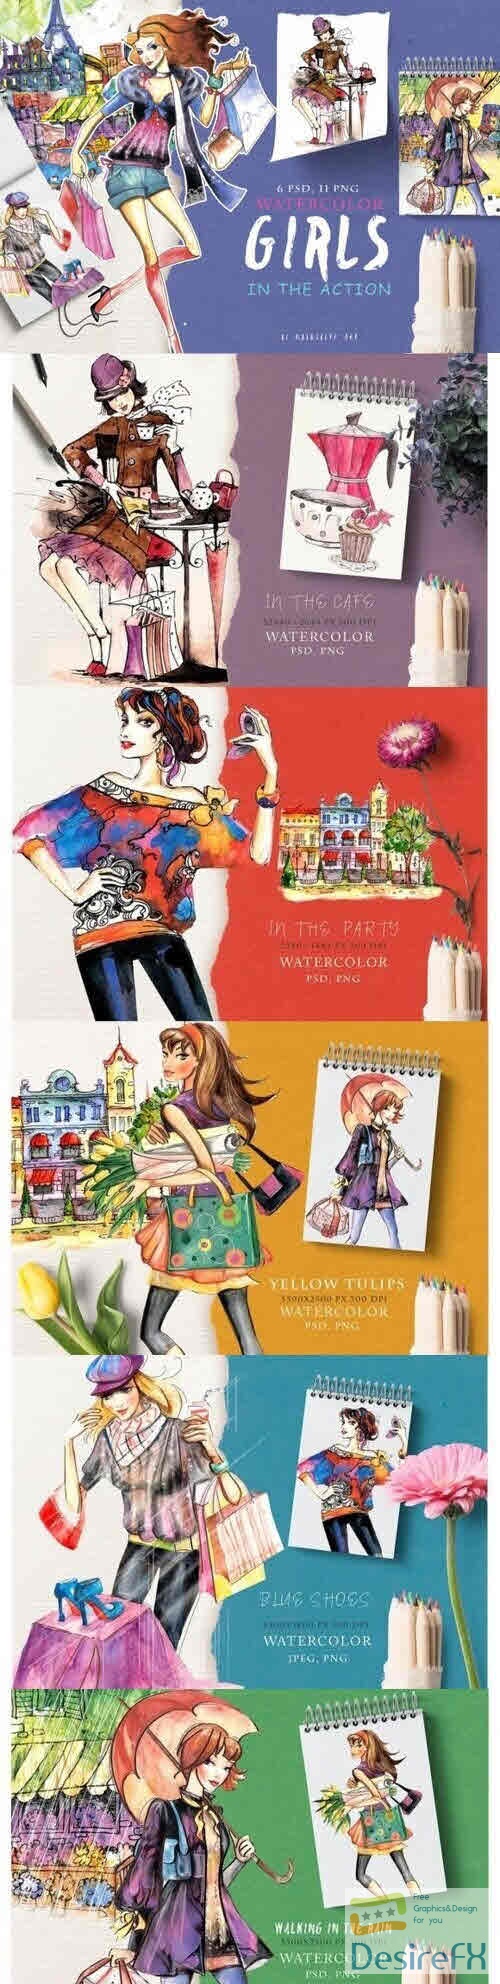 Watercolor Girls in the Action